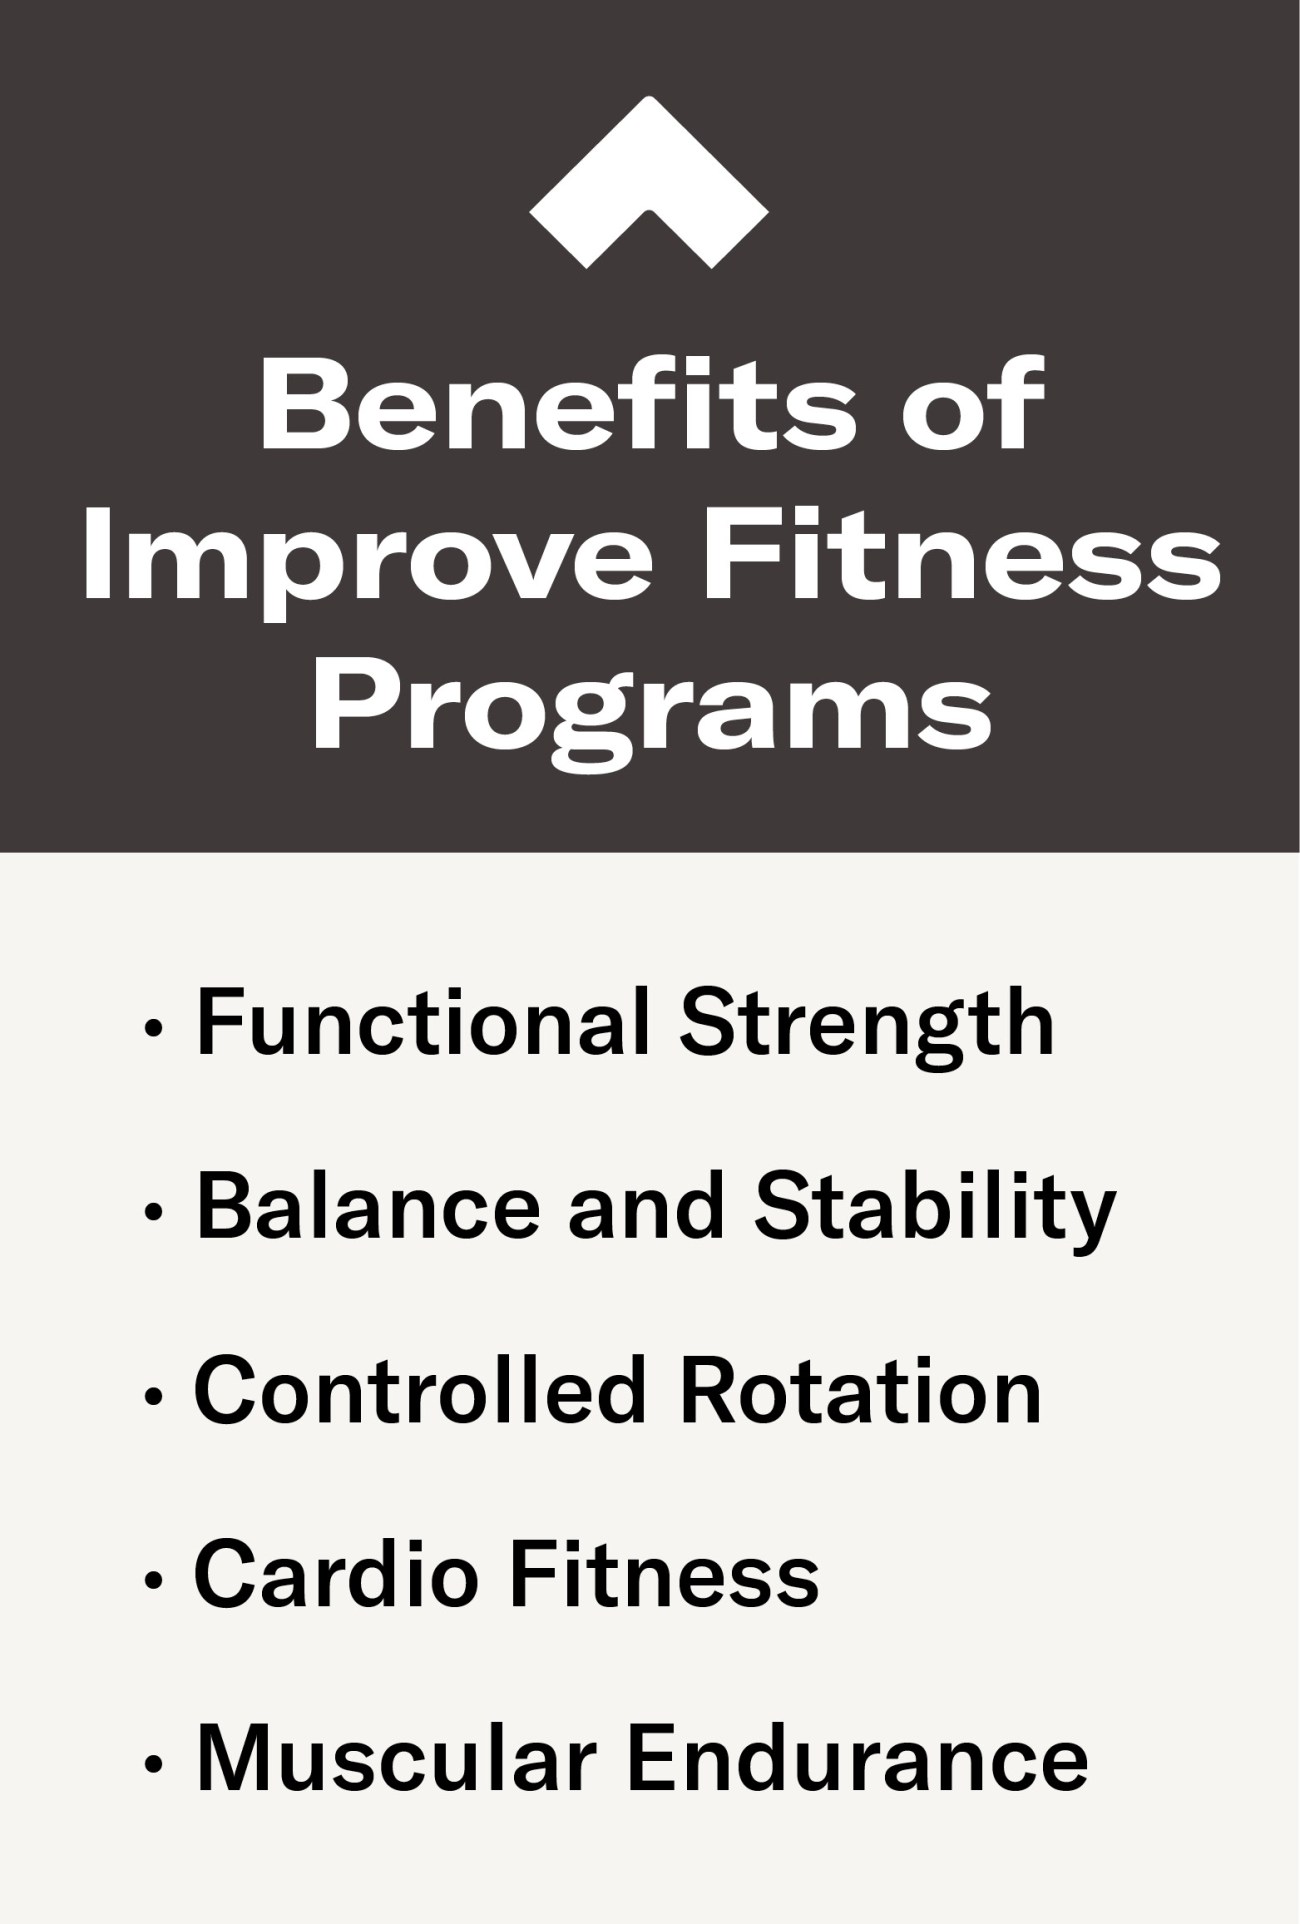 Benefits of Improve Fitness Programs:
- Functional Strength
- Balance and Stability
- Controlled Rotation
- Cardio Fitness
- Muscular Endurance